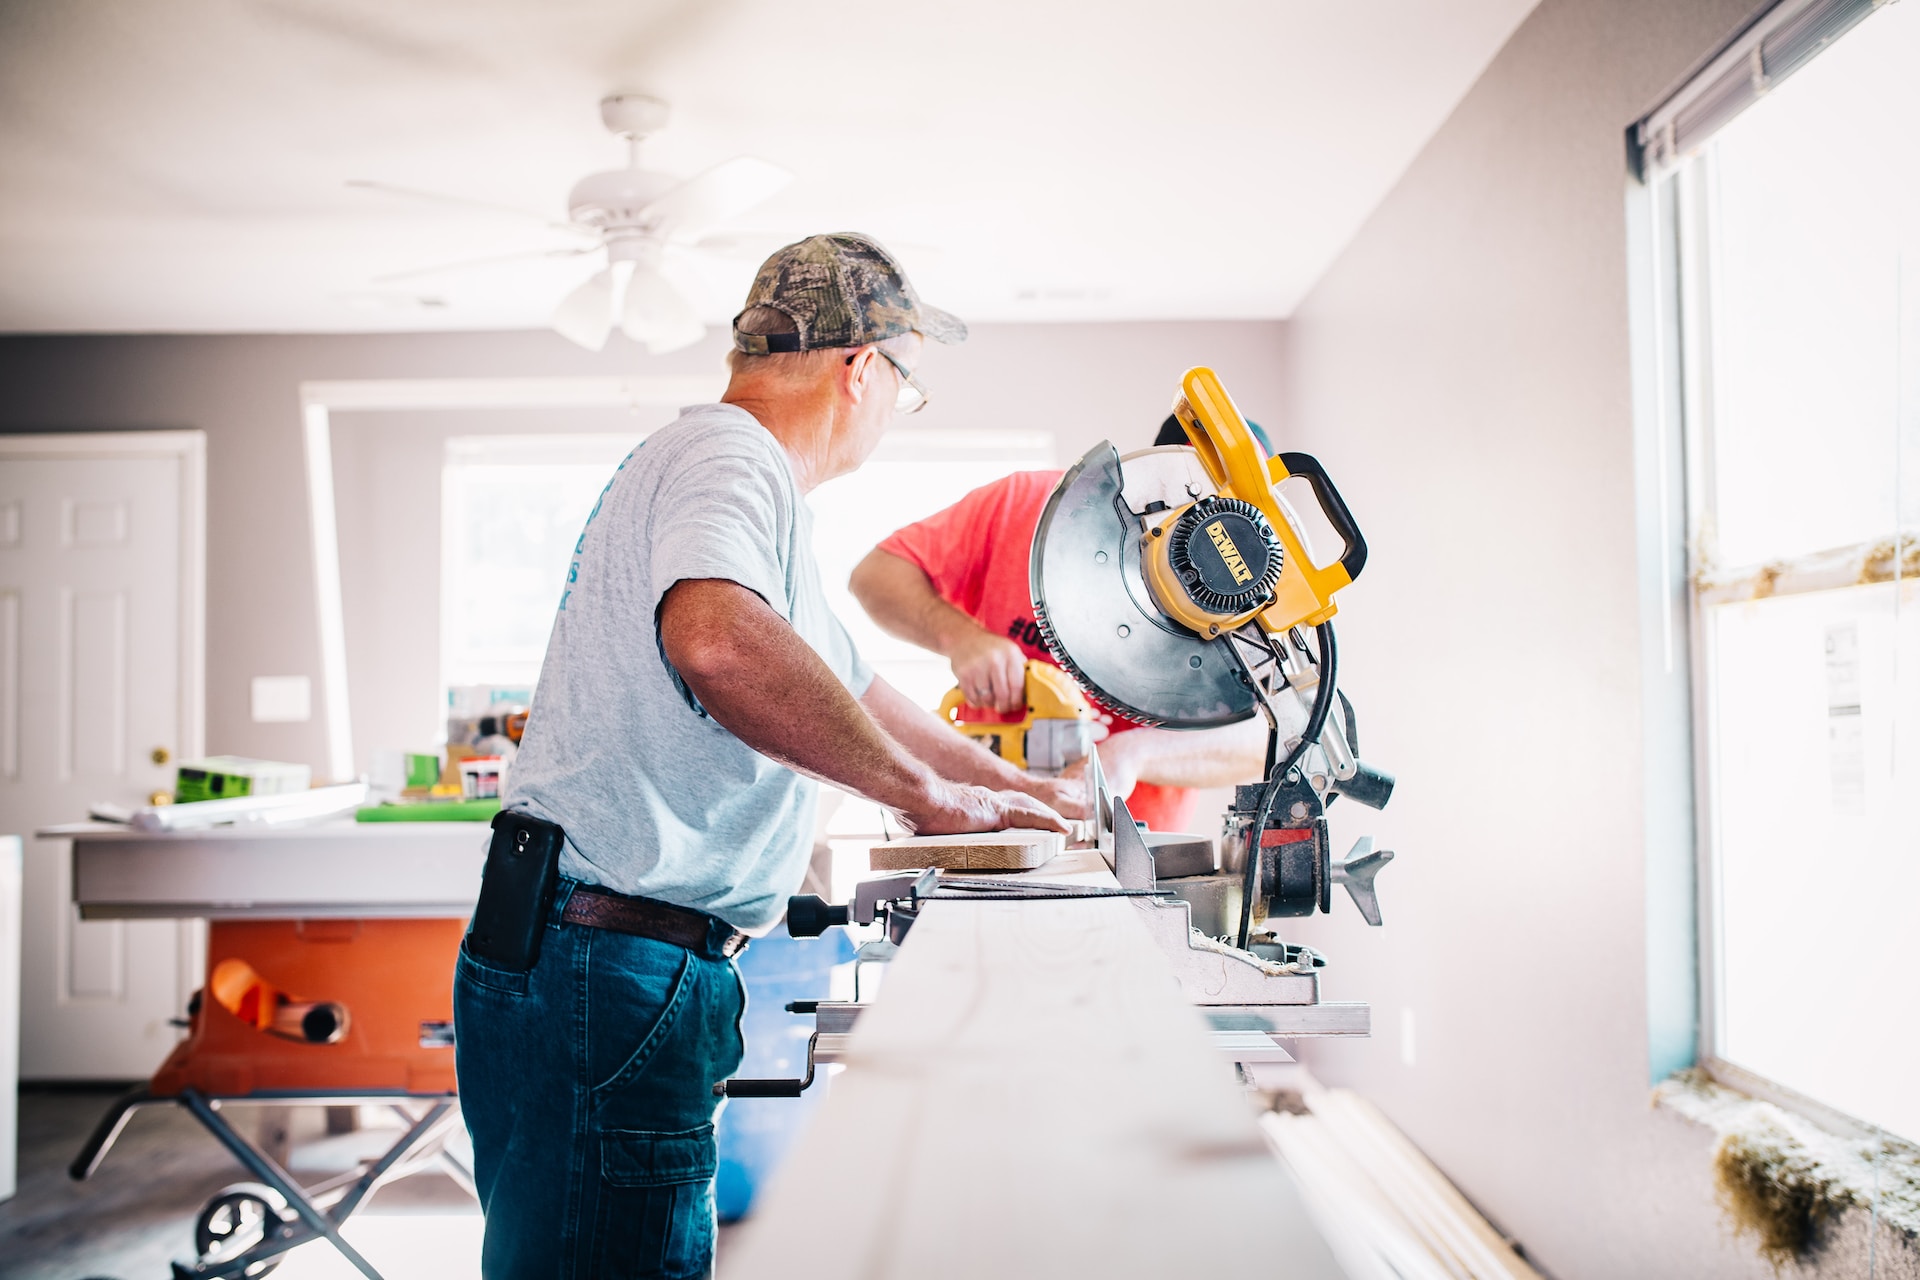 Top 7 Qualities to Look for When Hiring a Reliable Contractor